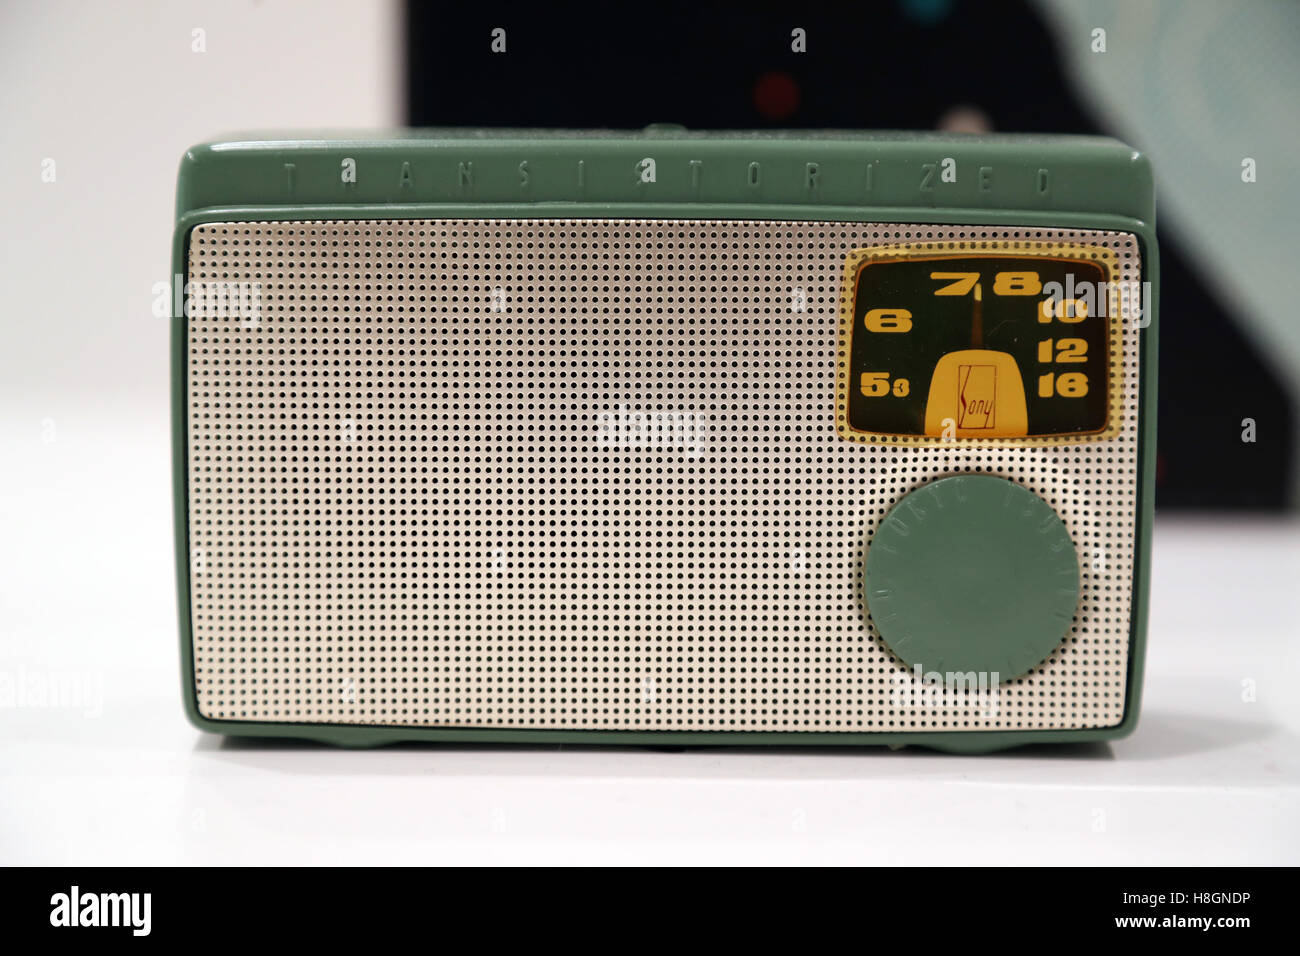 Tokyo, Japan. 12th Nov, 2016. Japan's electronics giant Sony displays the company's transistor radio receiver 'TR-55' produced in 1955 at the company's retrospective exhibition 'It's a Sony exhibition' at the Sony building in Ginza in Tokyo on Saturday, November 12, 2016. Sony exhibited the company's historical products at the building which was built 50 years ago as Sony will close Sony's landnark Sony building on March 31, 2017 and will open Sony park in 2018 at the place. Credit:  Yoshio Tsunoda/AFLO/Alamy Live News Stock Photo